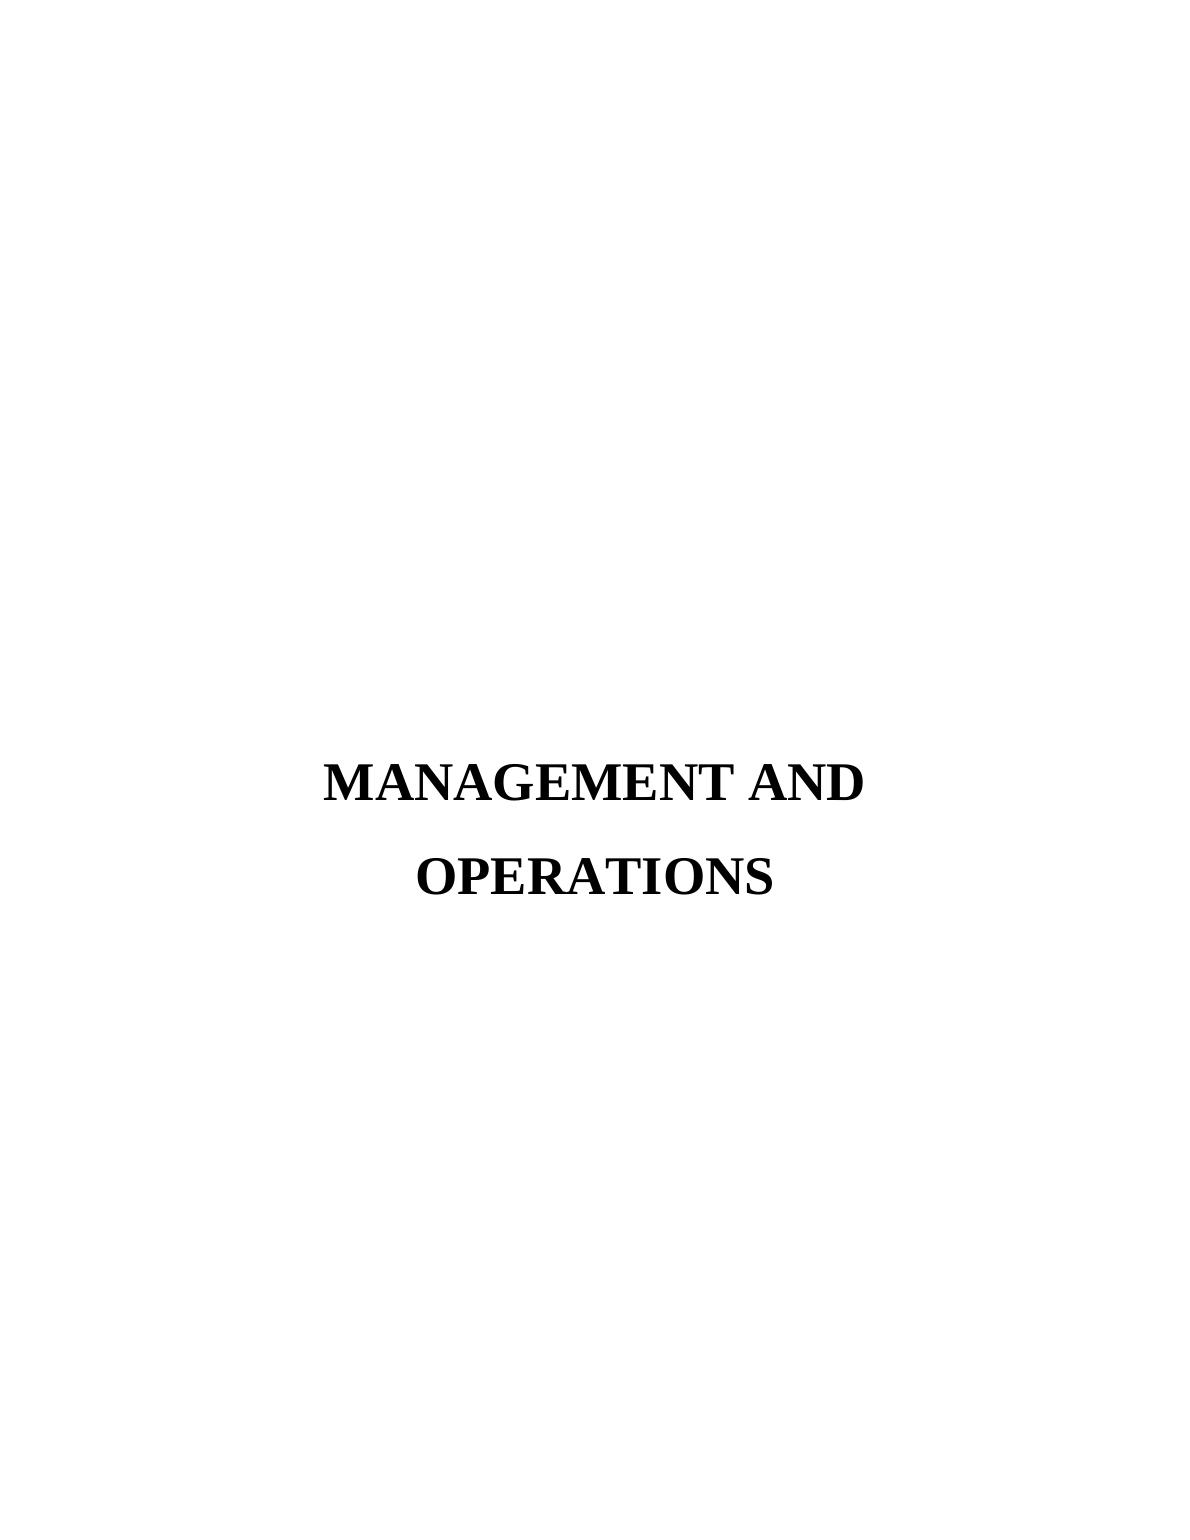 Management and Operations Assignment Solution - Marks and Spencer_1